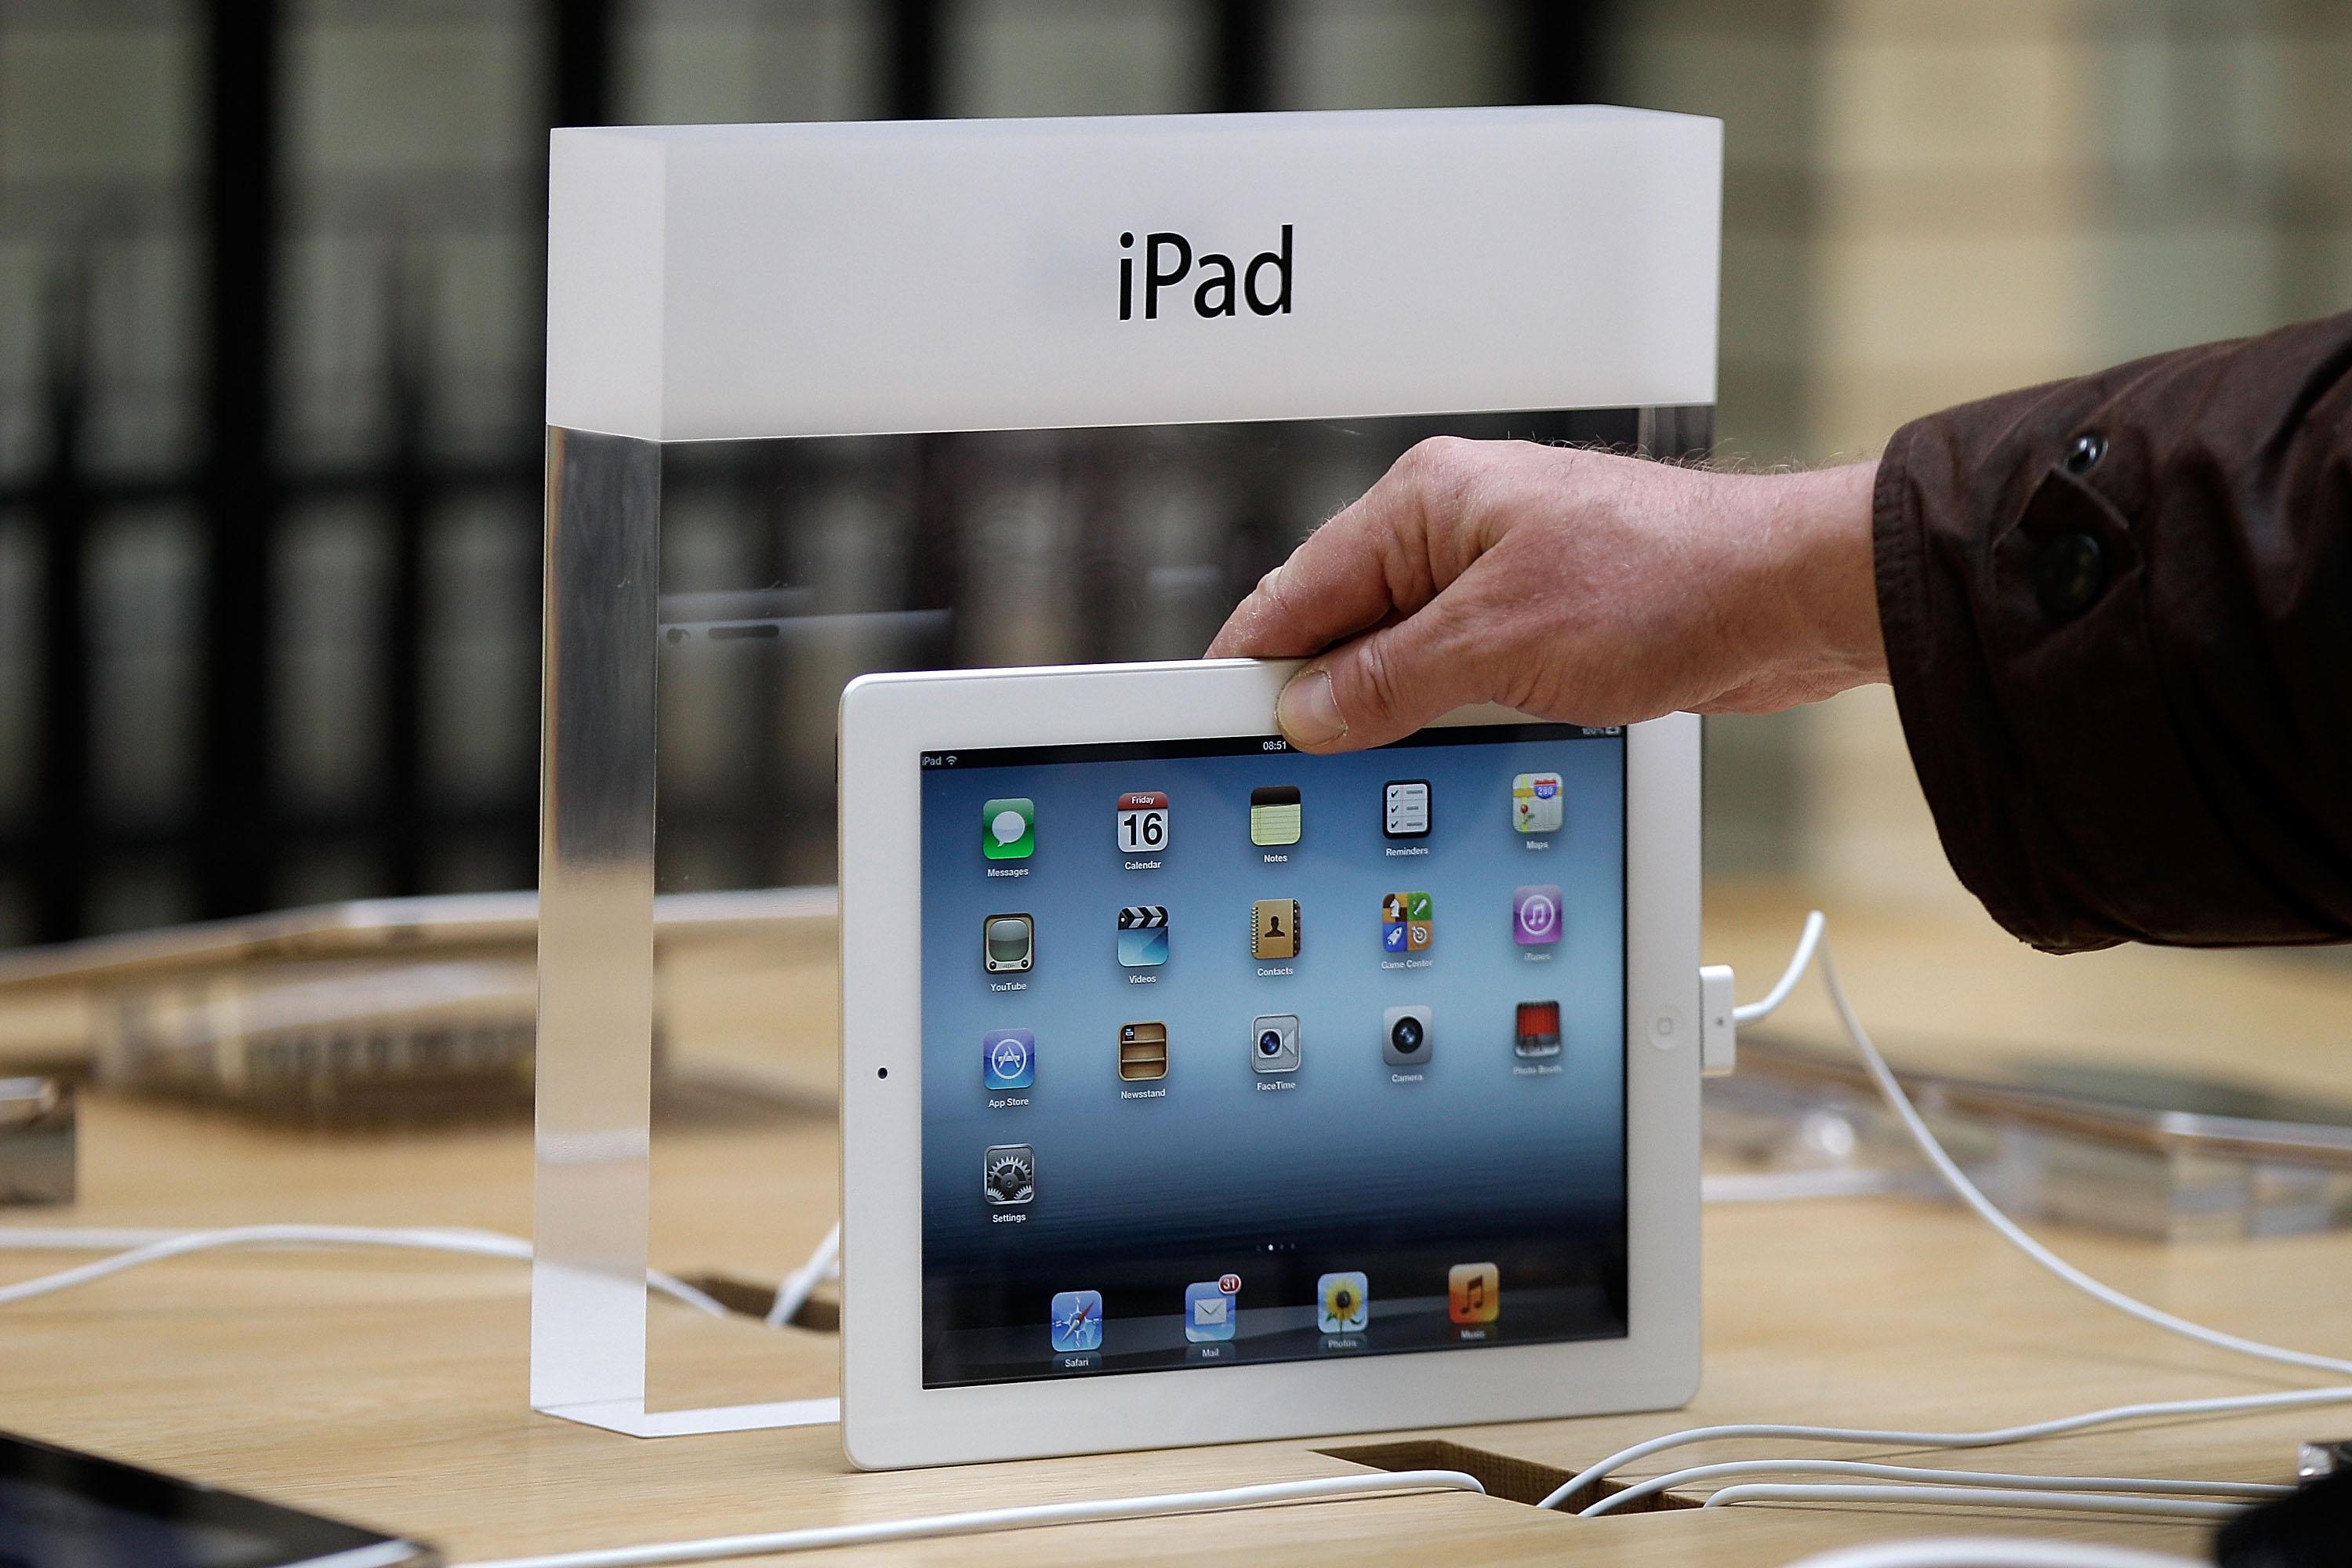 The New iPad Is Launched At The Apple Store In Covent Garden